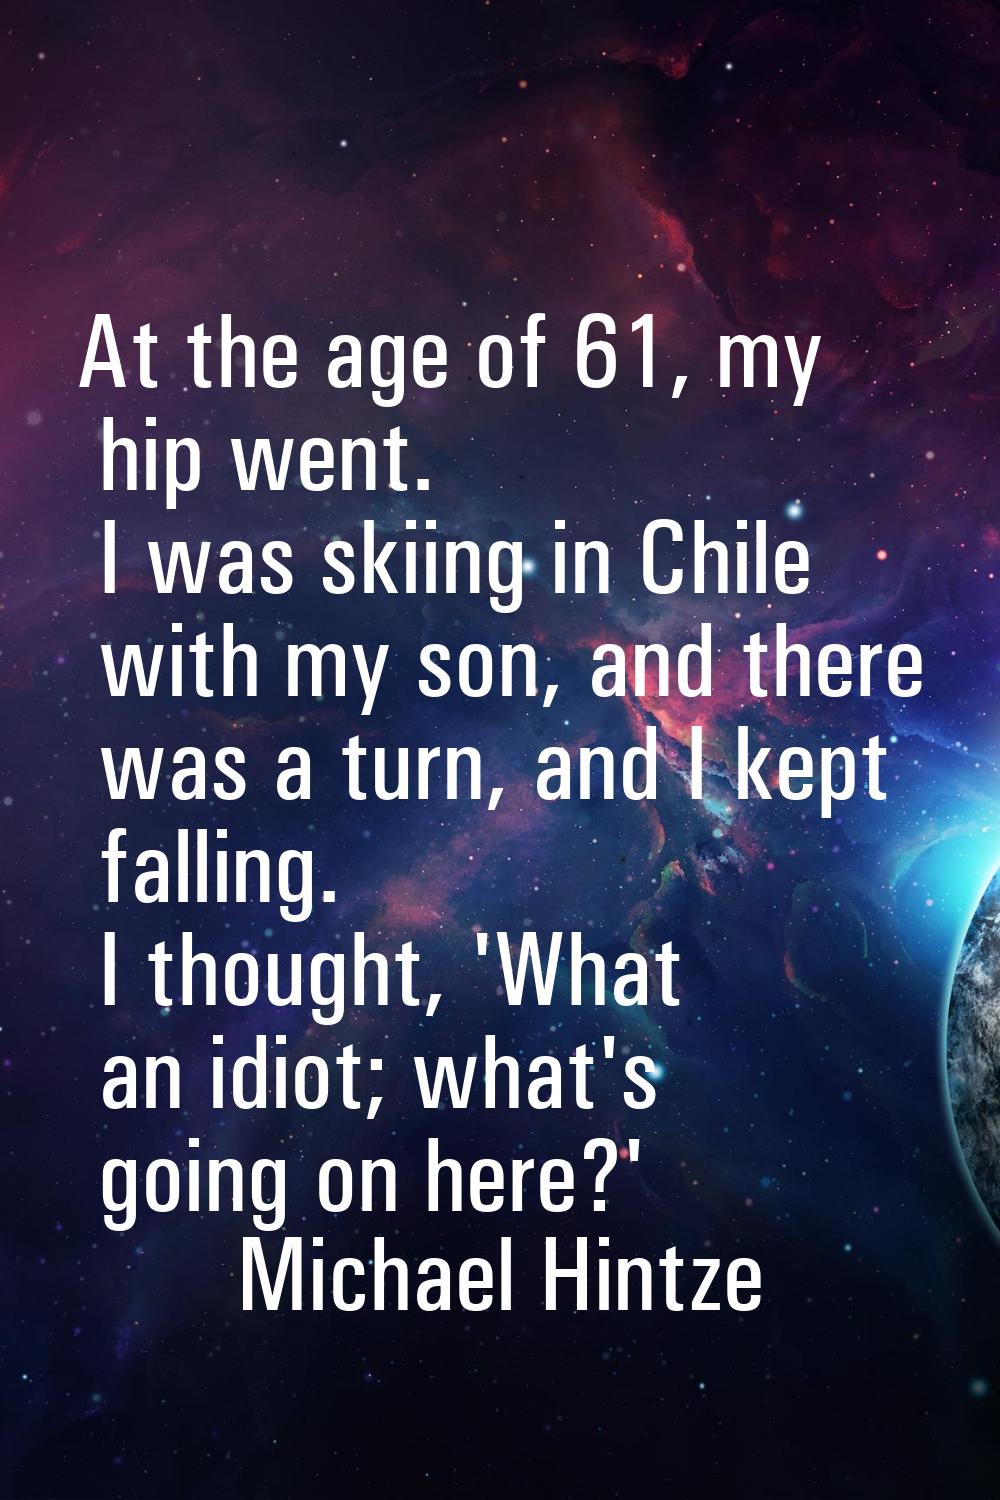 At the age of 61, my hip went. I was skiing in Chile with my son, and there was a turn, and I kept 